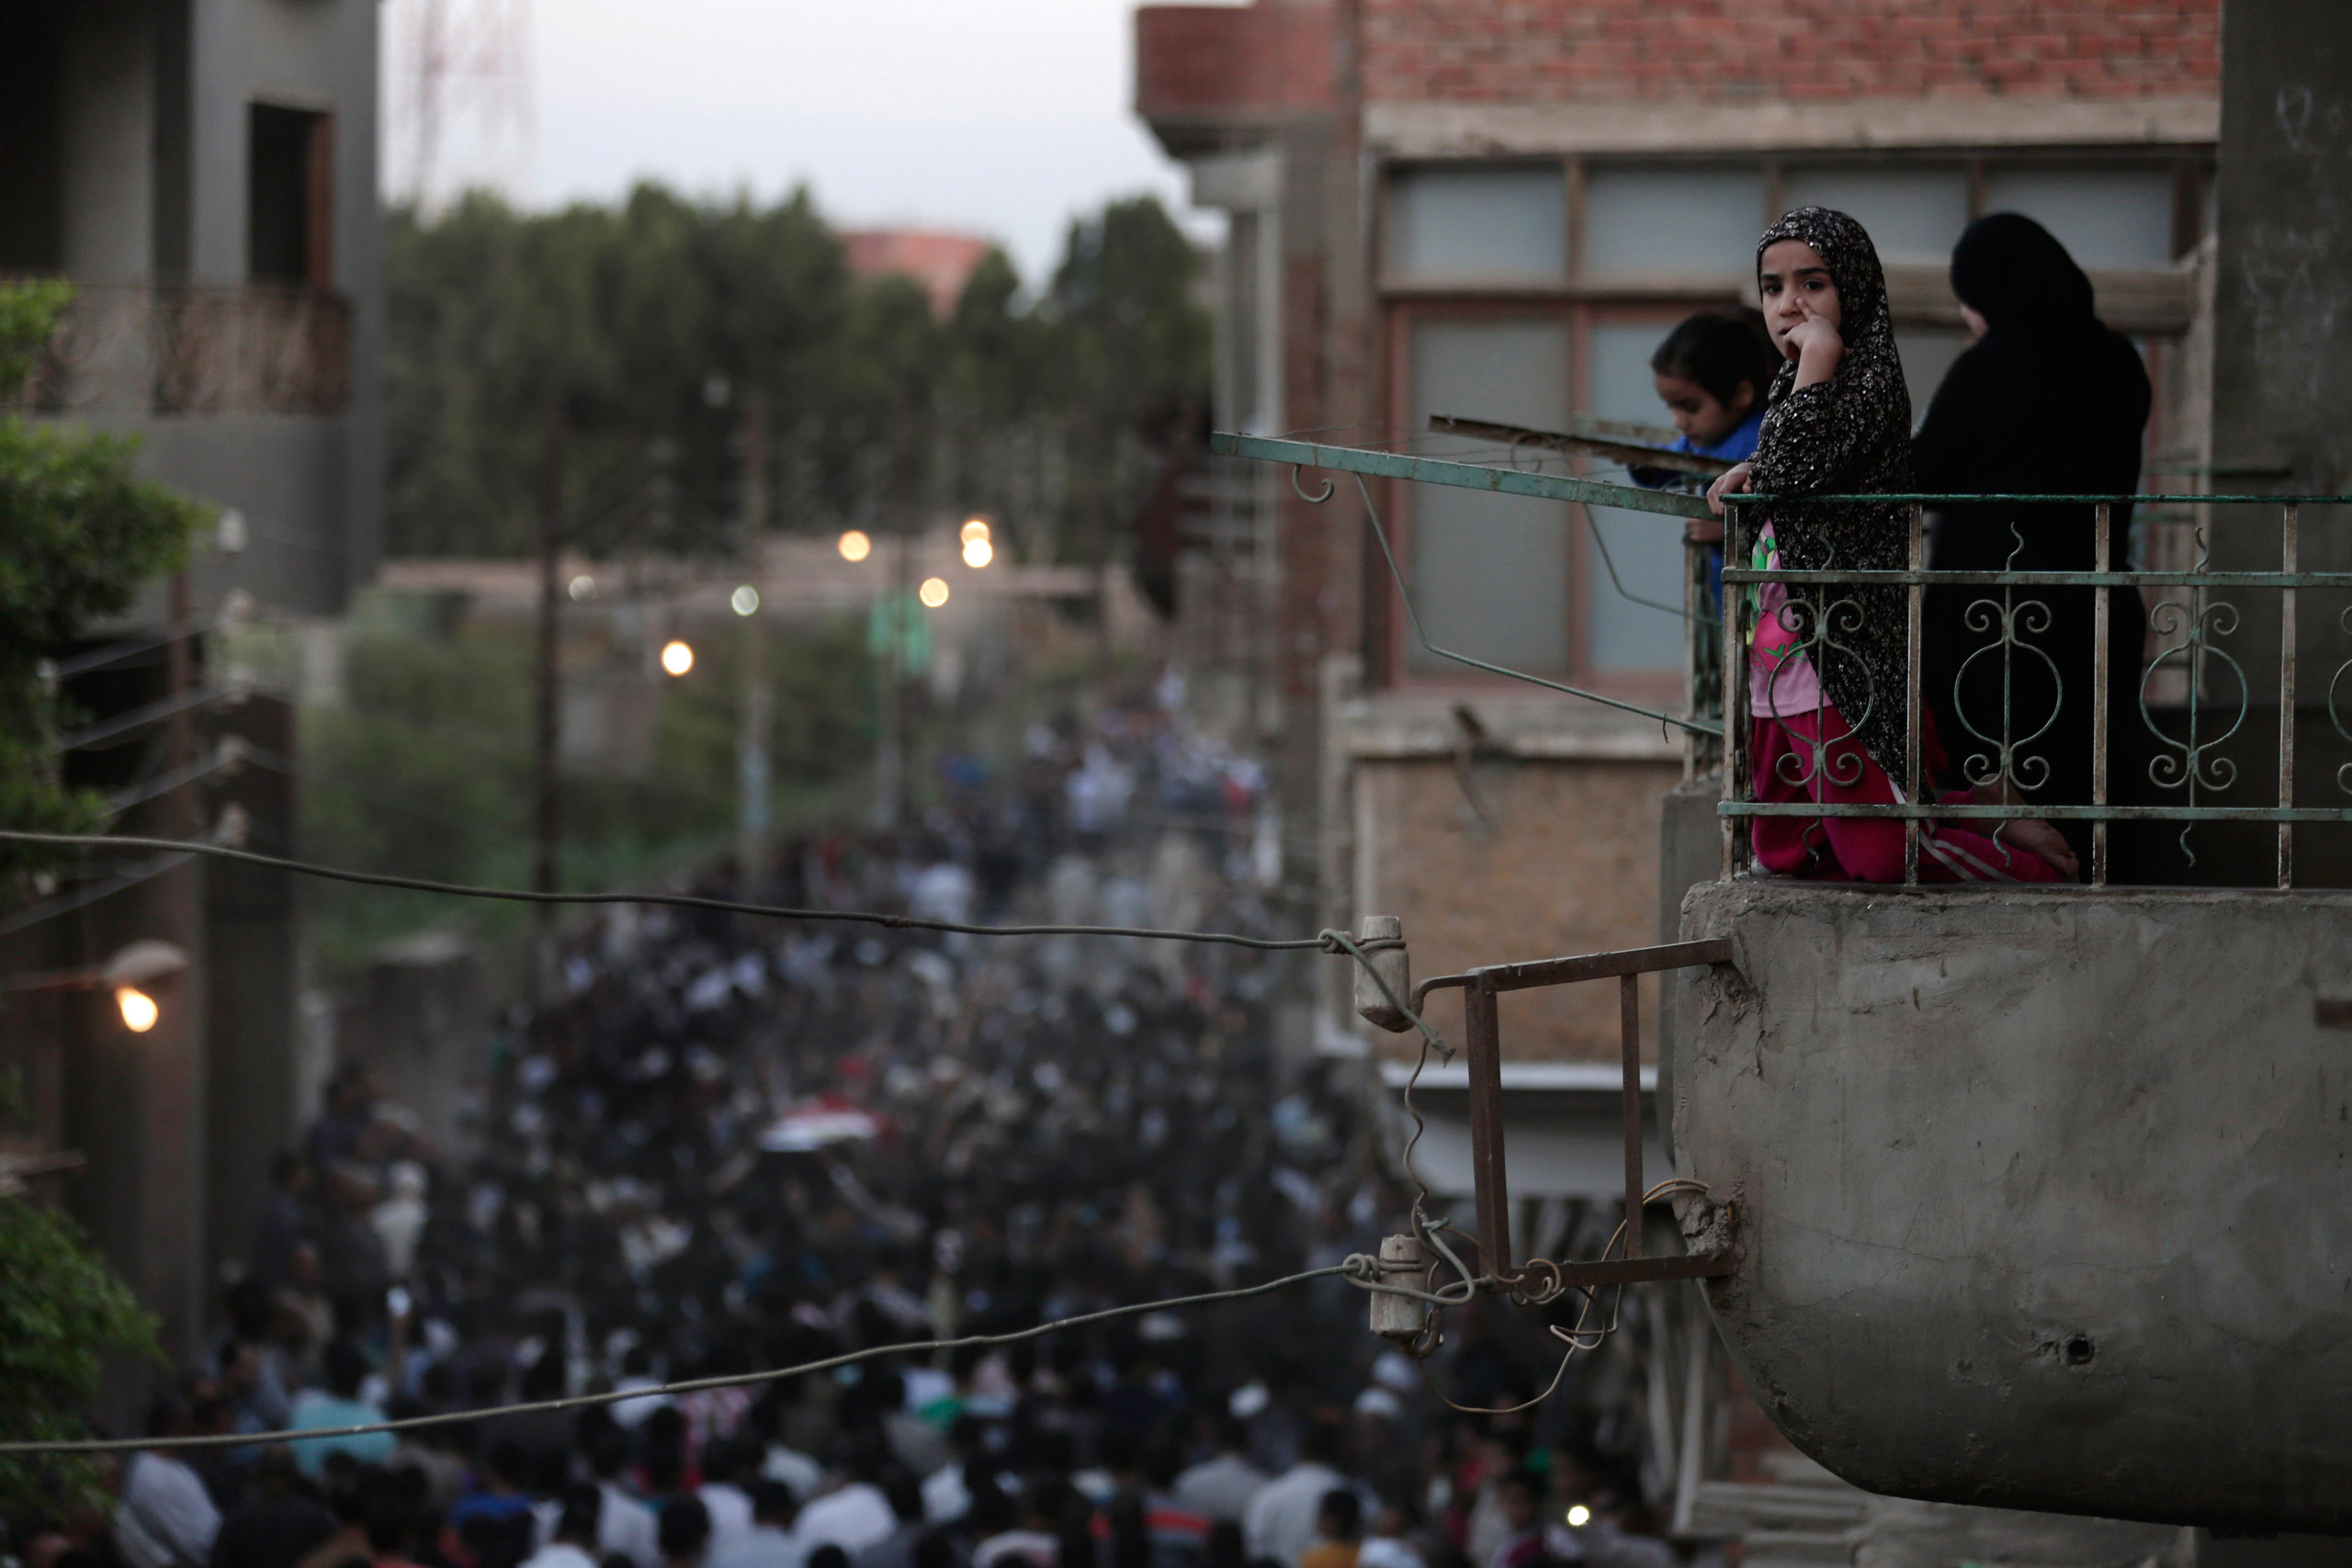 Egyptians mourn as they watch from their balcony during the funeral procession of 1st Lt. Mohammed Adel Abdel Azeem, killed in Wednesday's attack by Islamic militants in the Sinai, at his home village Tant Al Jazeera in Qalubiyah, north of Cairo, Egypt, Thursday, July 2, 2015. Islamic State-linked militants launched an unprecedented wave of attacks in northern Sinai on Wednesday, setting off the fiercest fighting the peninsula has seen in decades and undermining government efforts to stem the insurgency. (AP Photo/Hassan Ammar)